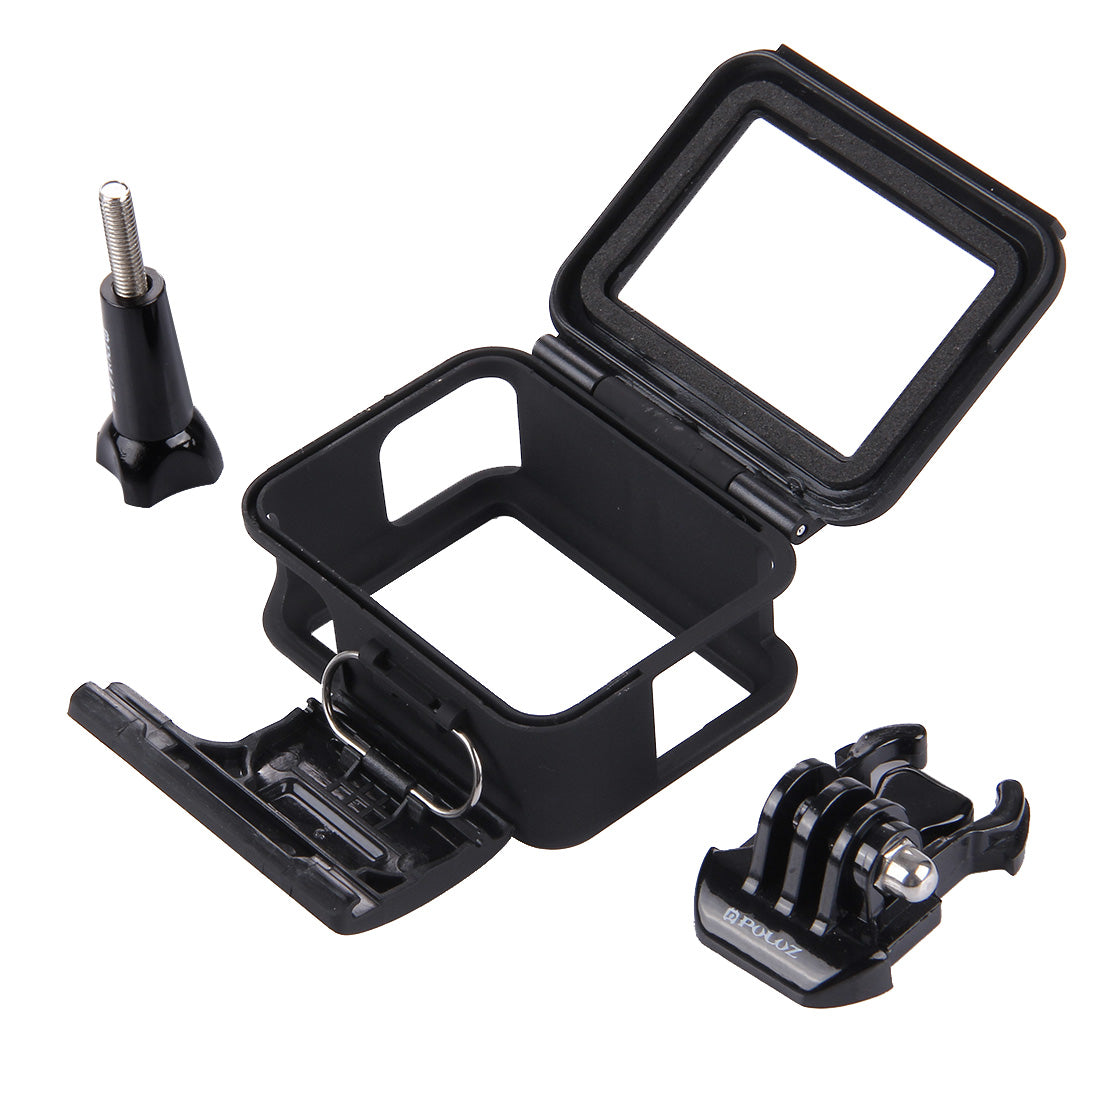 Puluz PU187 Plastic Housing Shell Frame Mount Protective Case Cage for GoPro Hero 7 Black / 6 / 5